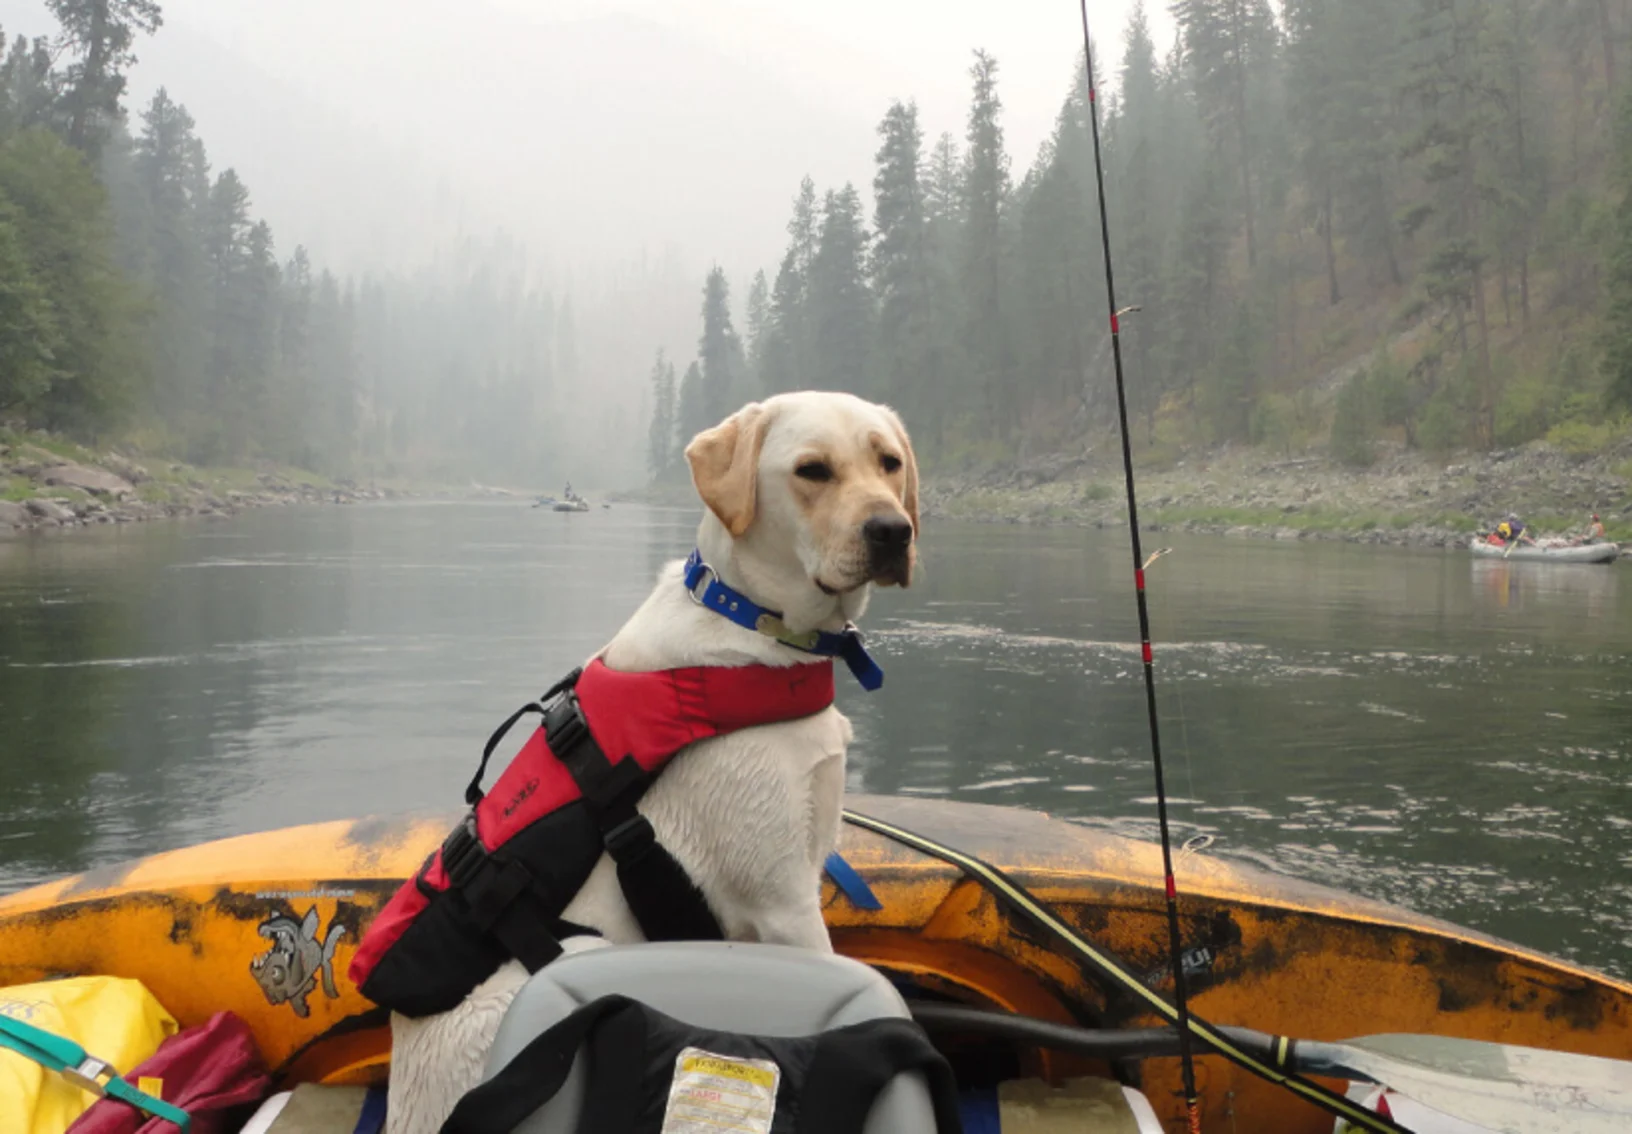 White lab sitting in canoe on a river during a cloudy day